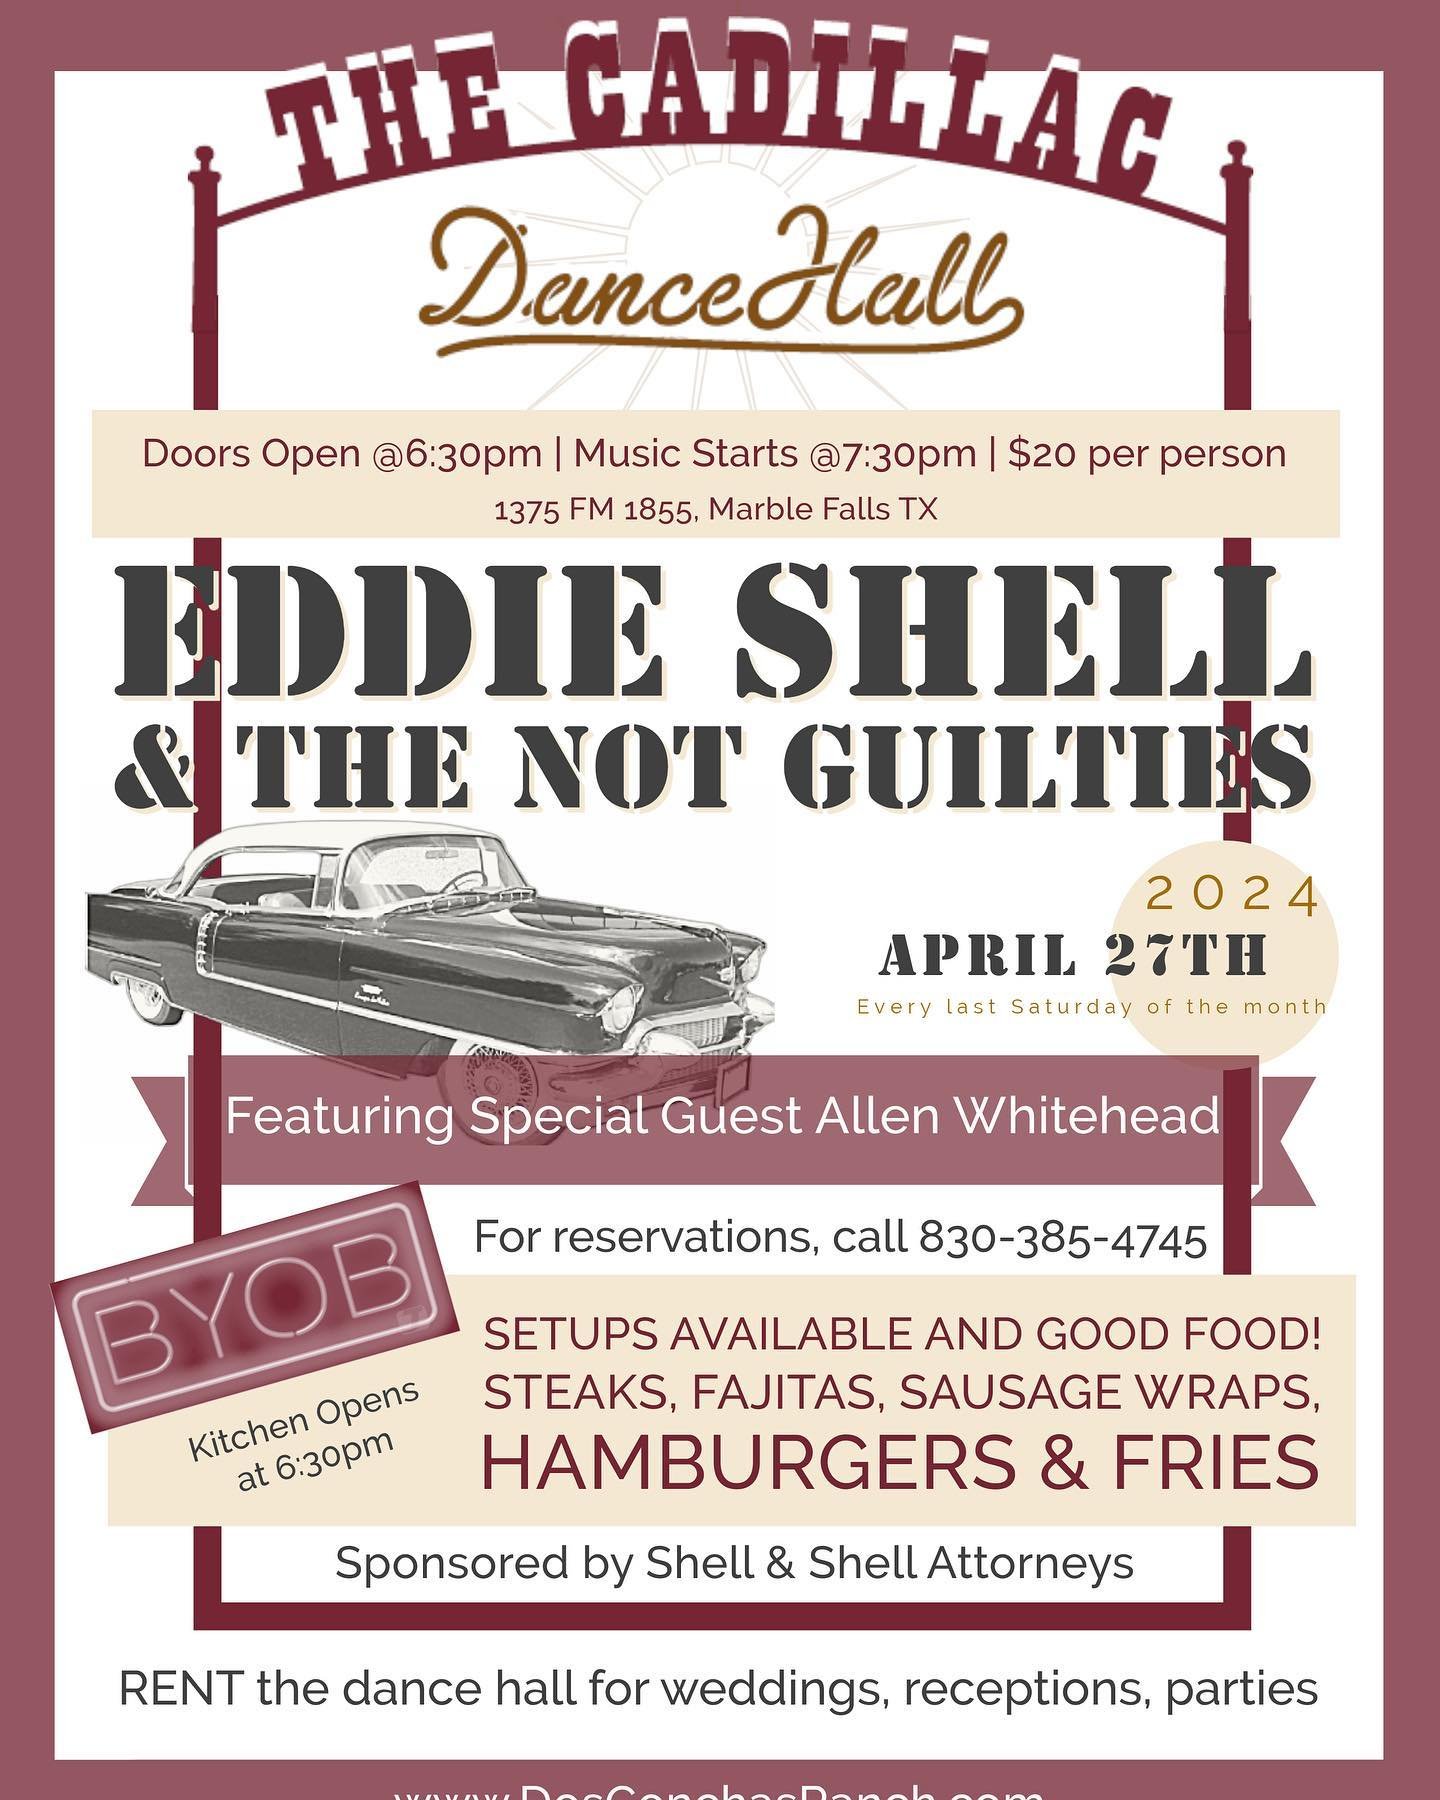 Mark your calendars for April 27th! This month at the dance hall we have special guest Allen Whitehead joining Eddie She&rsquo;ll &amp; The Not Guilties on the Cadillac stage! Do you have your seats reserved yet? Call (830) 385-4745 and we&rsquo;ll s